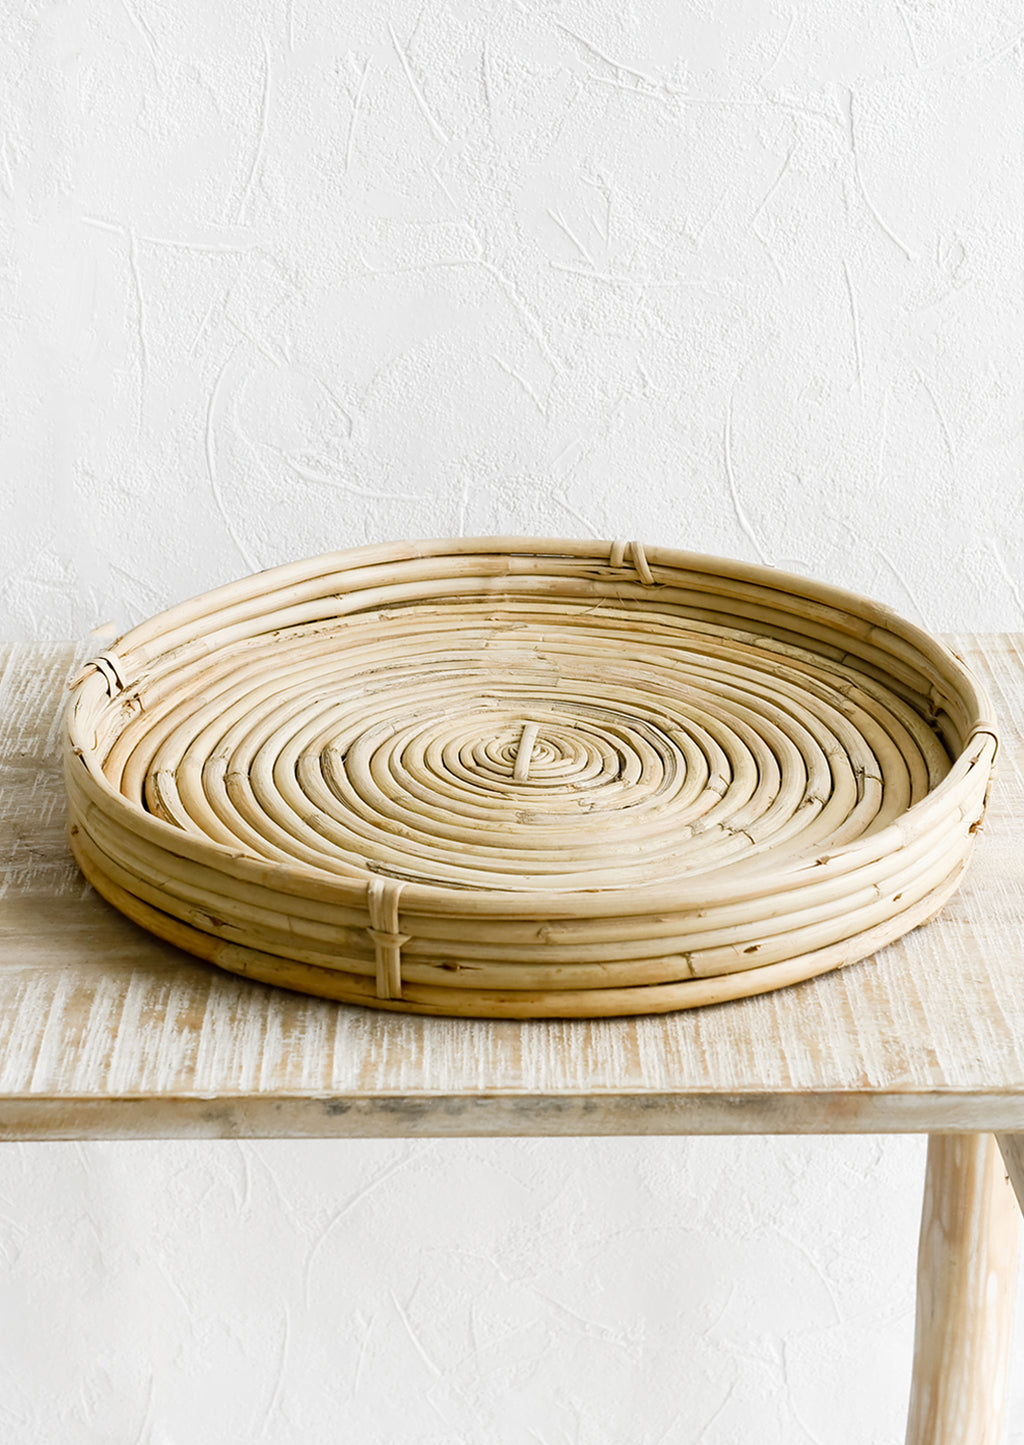 2: A round, shallow woven tray made from rattan.